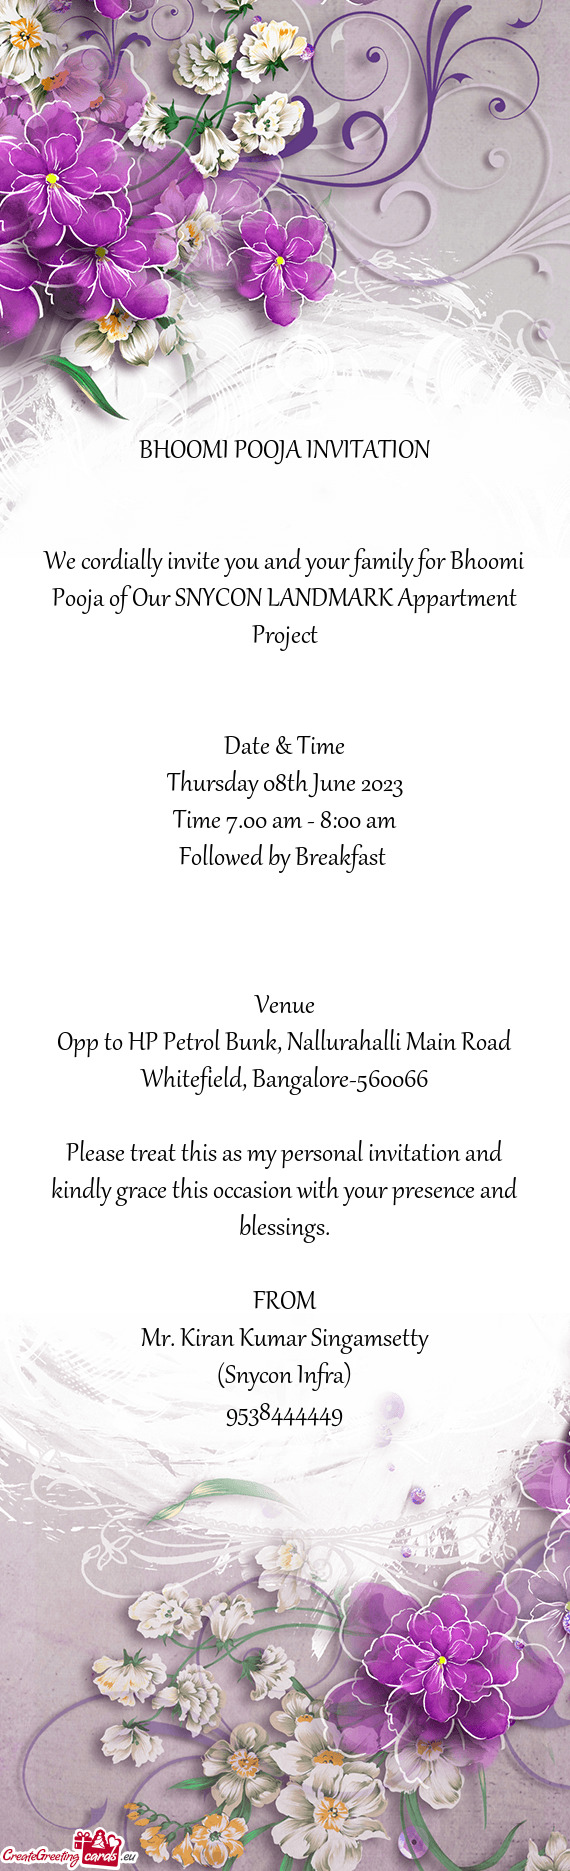 We cordially invite you and your family for Bhoomi Pooja of Our SNYCON LANDMARK Appartment Project